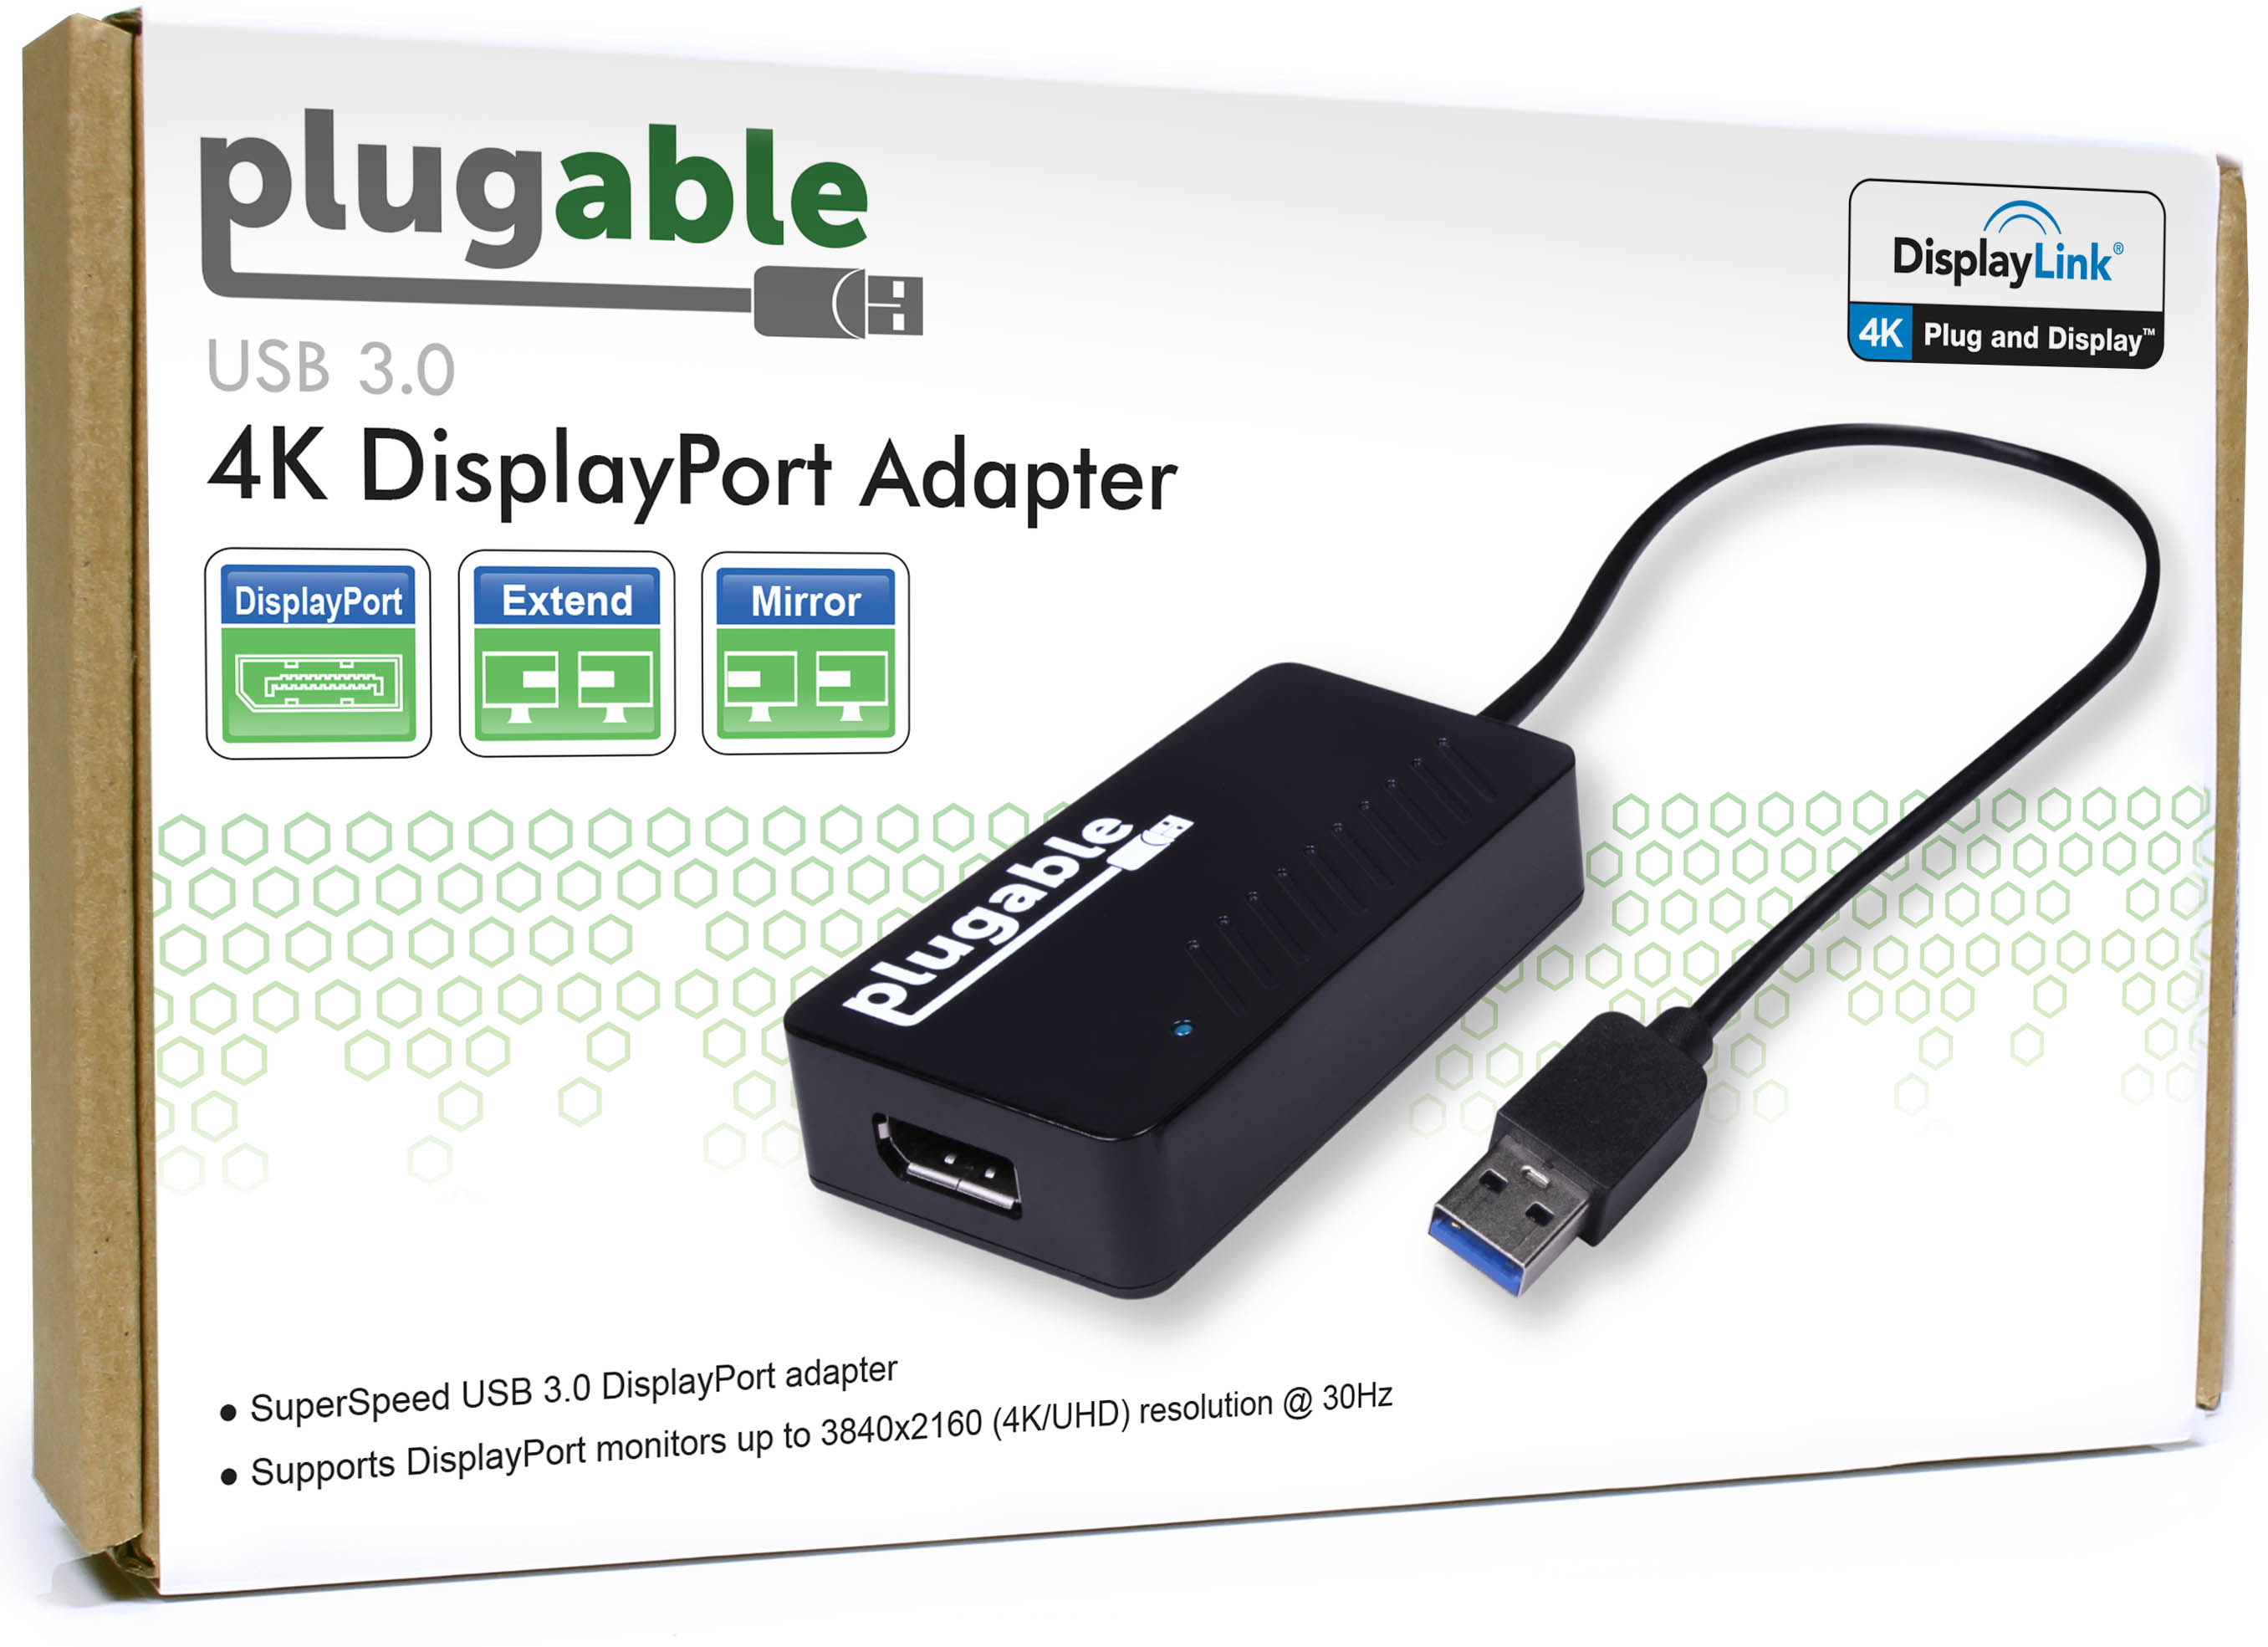 Plugable USB 3.0 to DisplayPort 4K UHD Video Graphics Adapter for Multiple Monitors up to 3840x2160 Supports Windows 11,10, 8.1, 7, and macOS - image 2 of 5